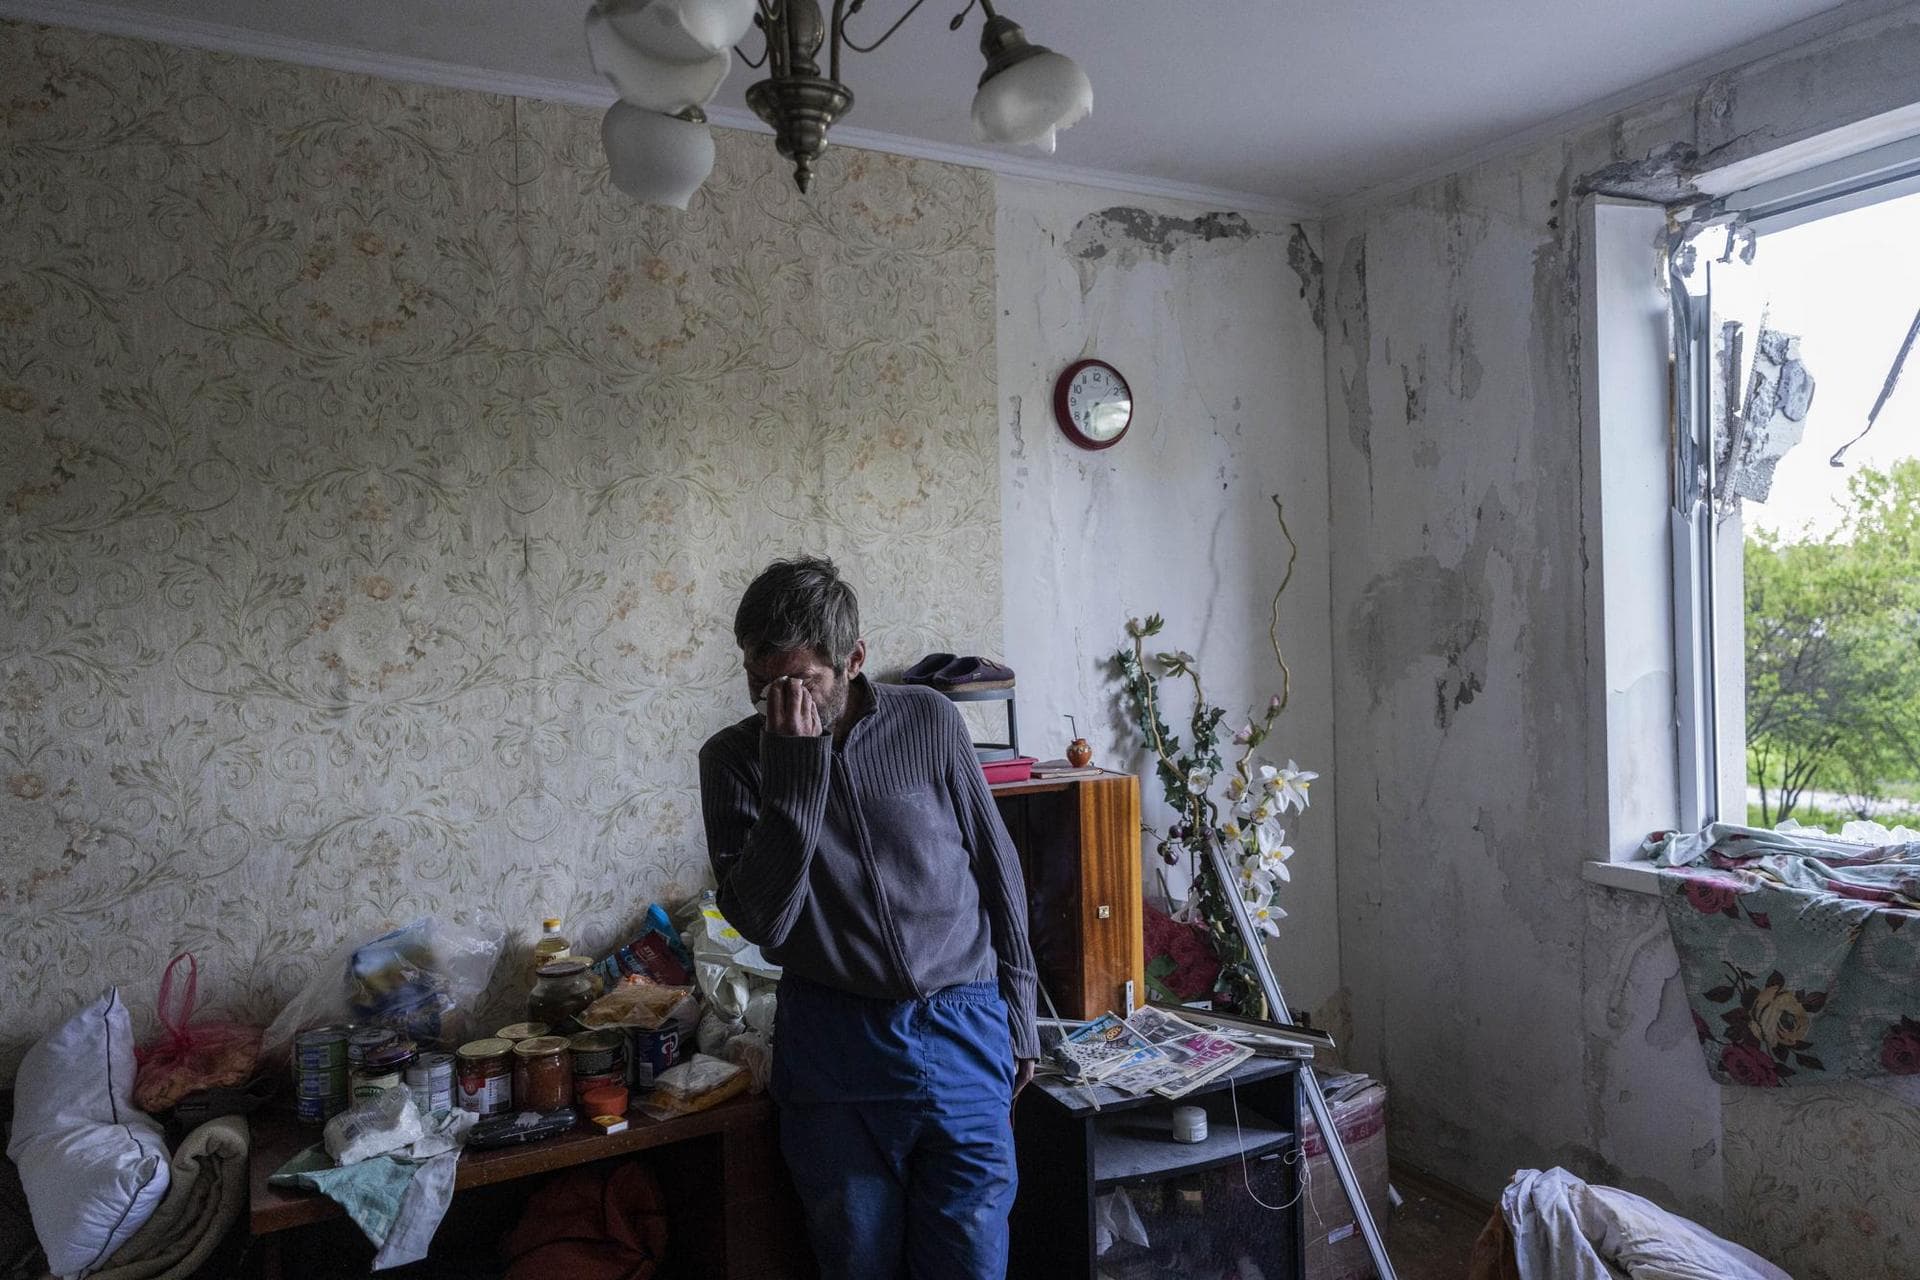 Roman Pryhodchenko cries inside his house damaged by multiple shelling in Kharkiv